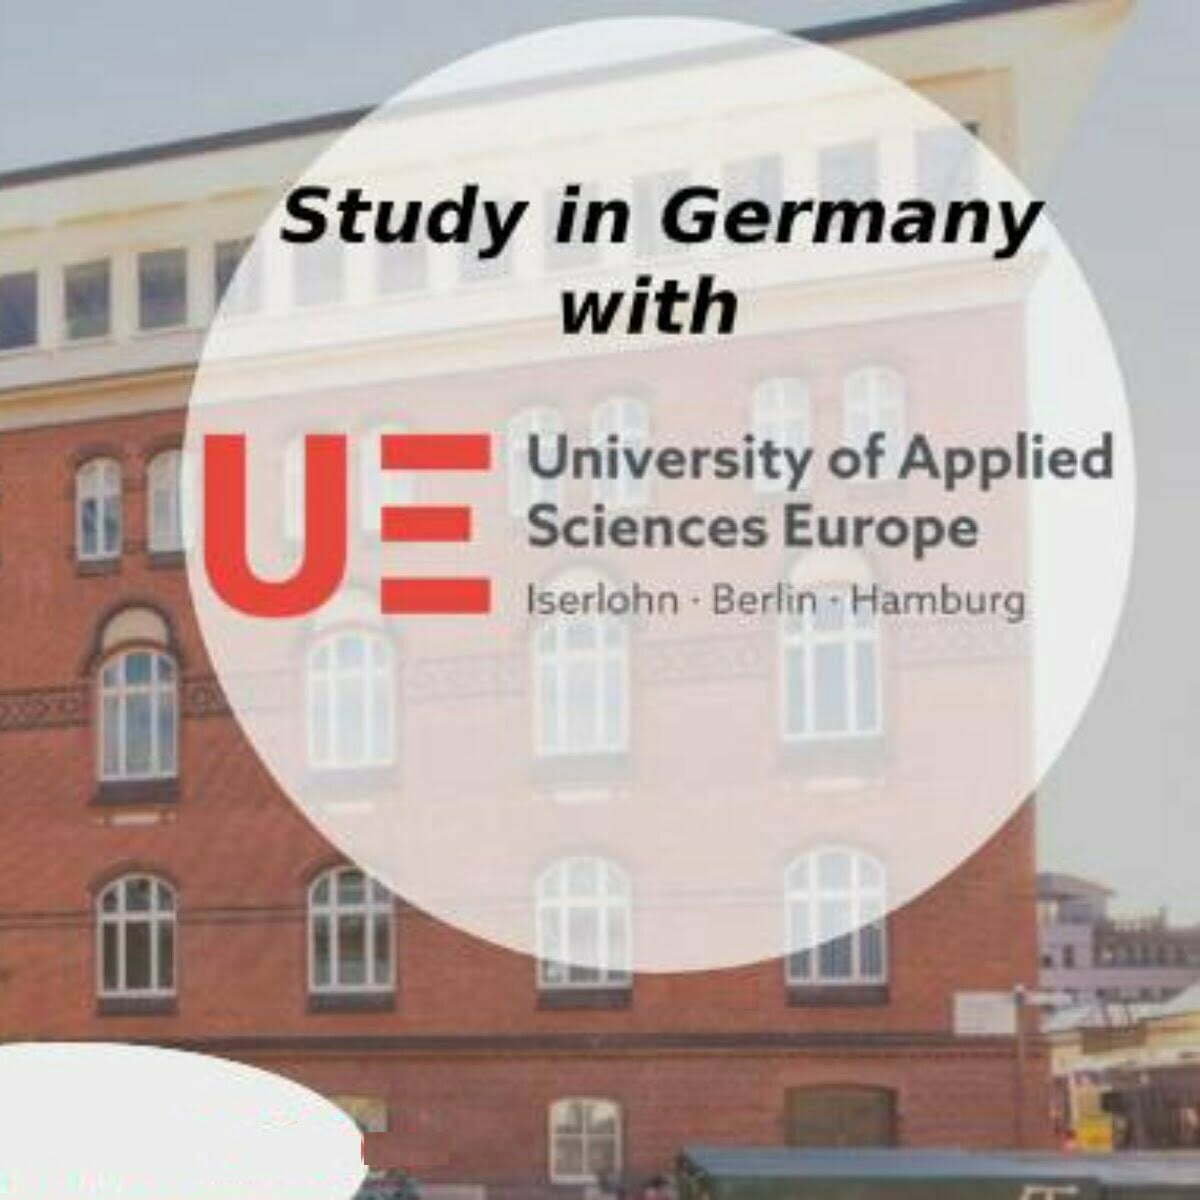 University of Europe for Applied Science 2023 Scholarships in Germany